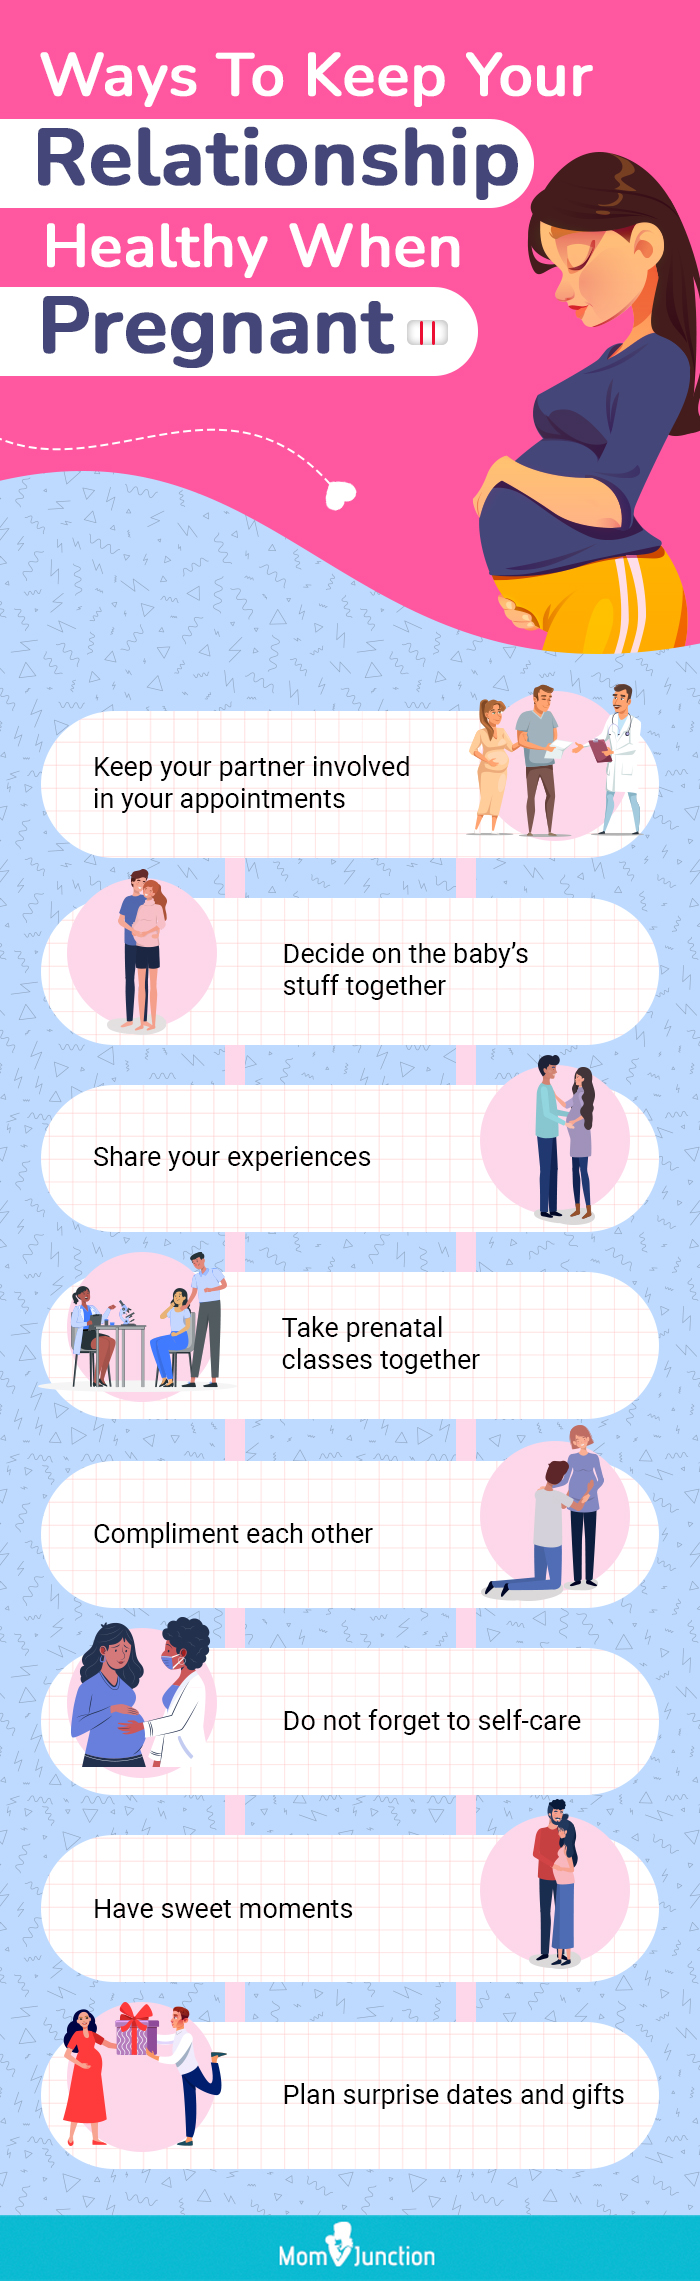 https://www.momjunction.com/wp-content/uploads/2022/11/Ways-To-Keep-Your-Relationship-Healthy-When-Pregnant.jpg